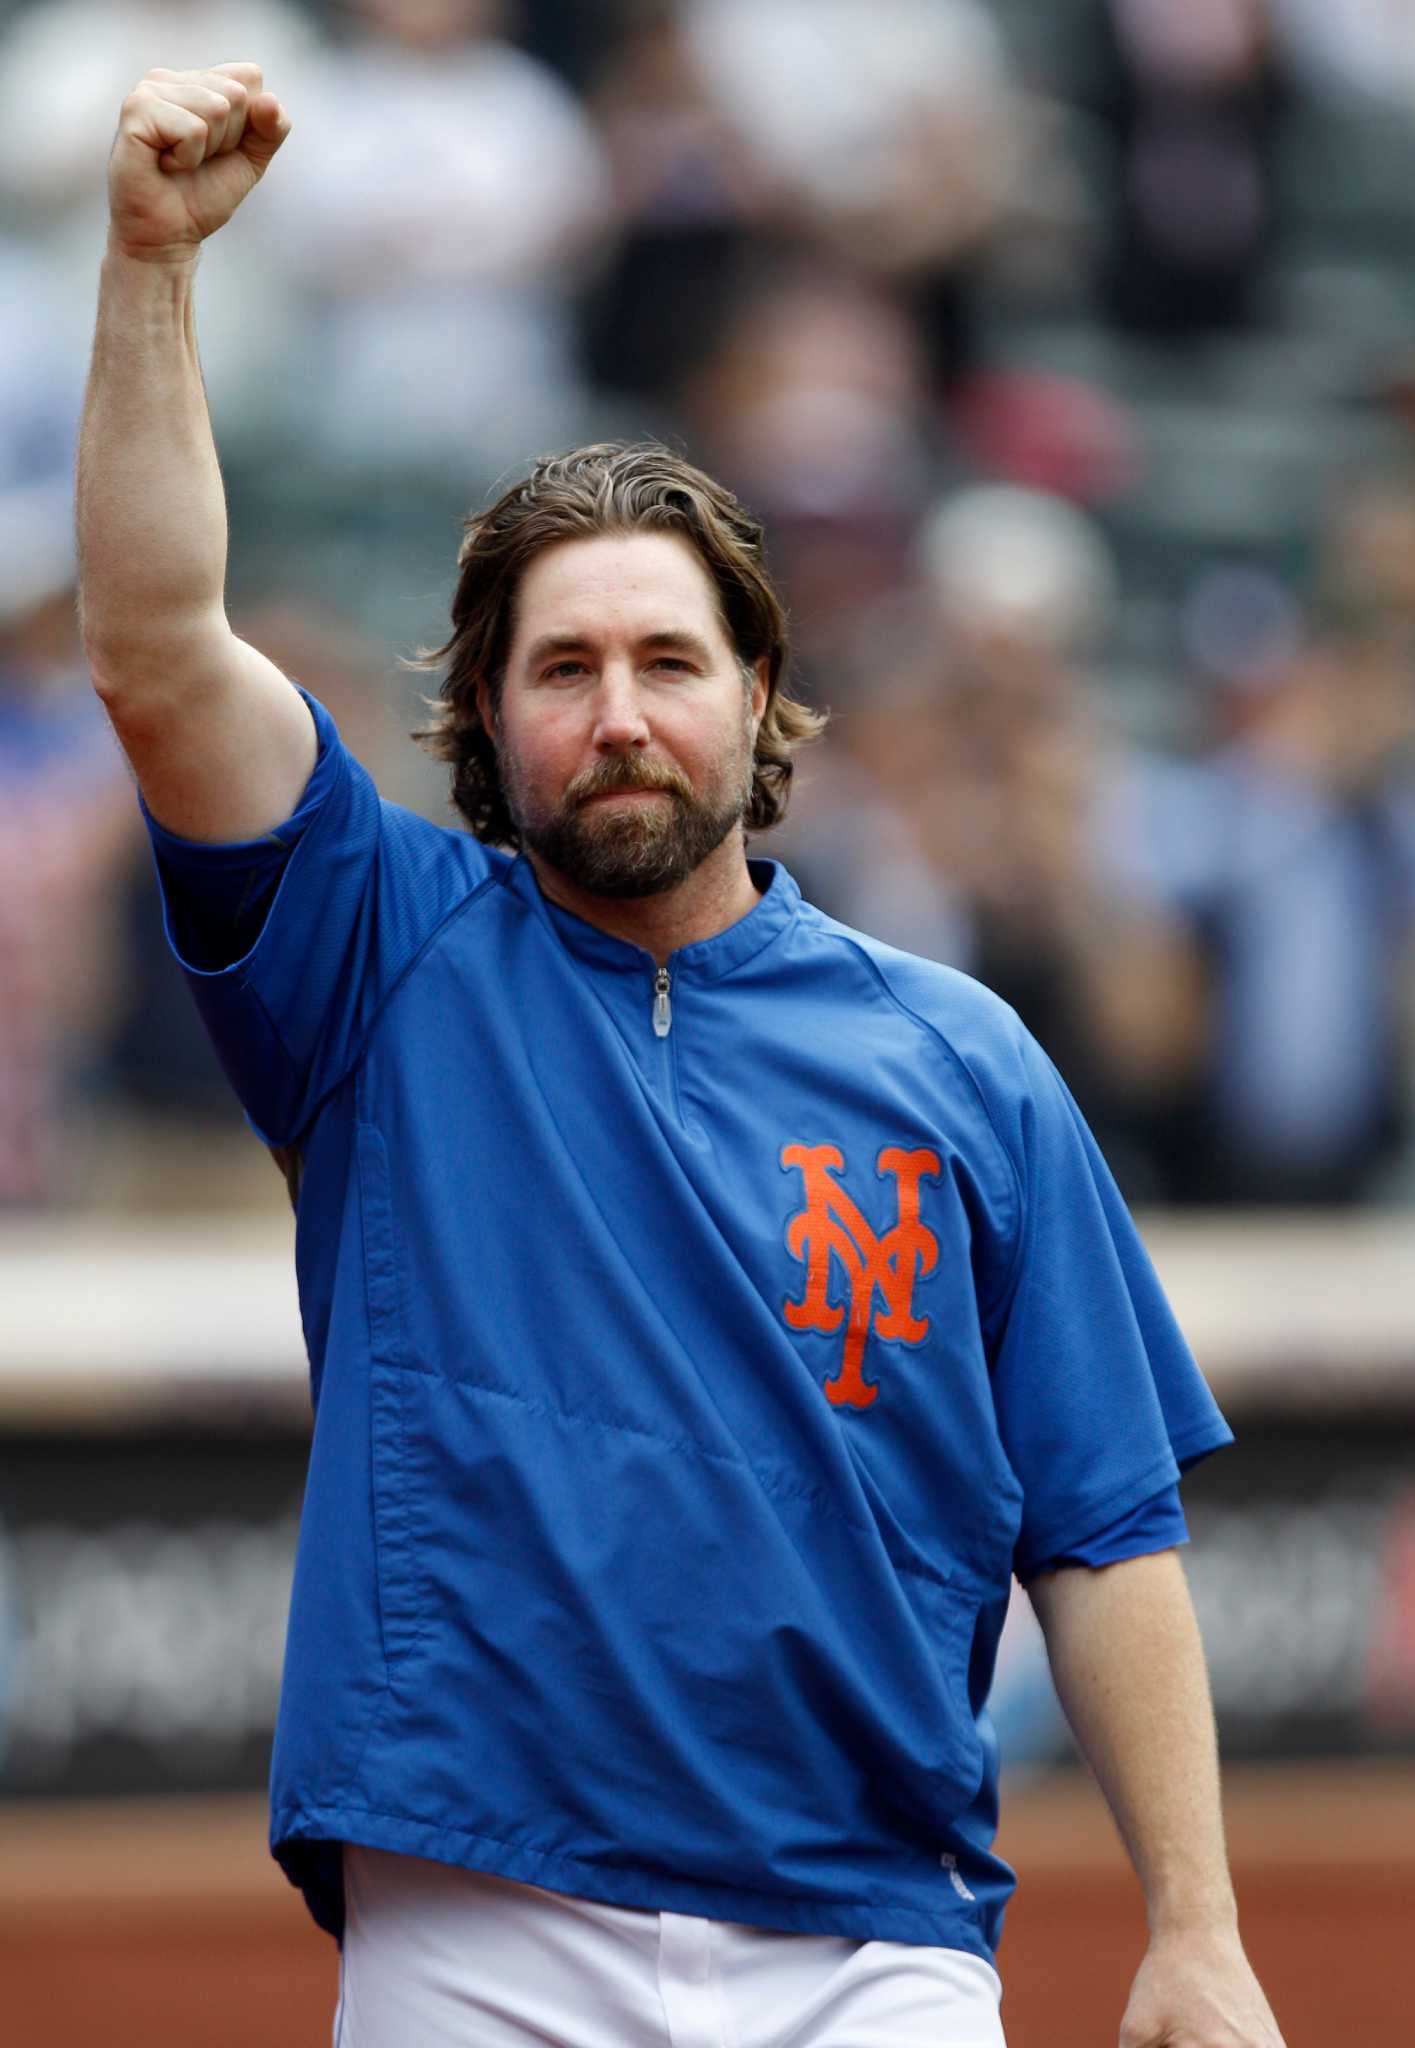 Mets Trade Dickey to Blue Jays for Prospects - Minor League Ball